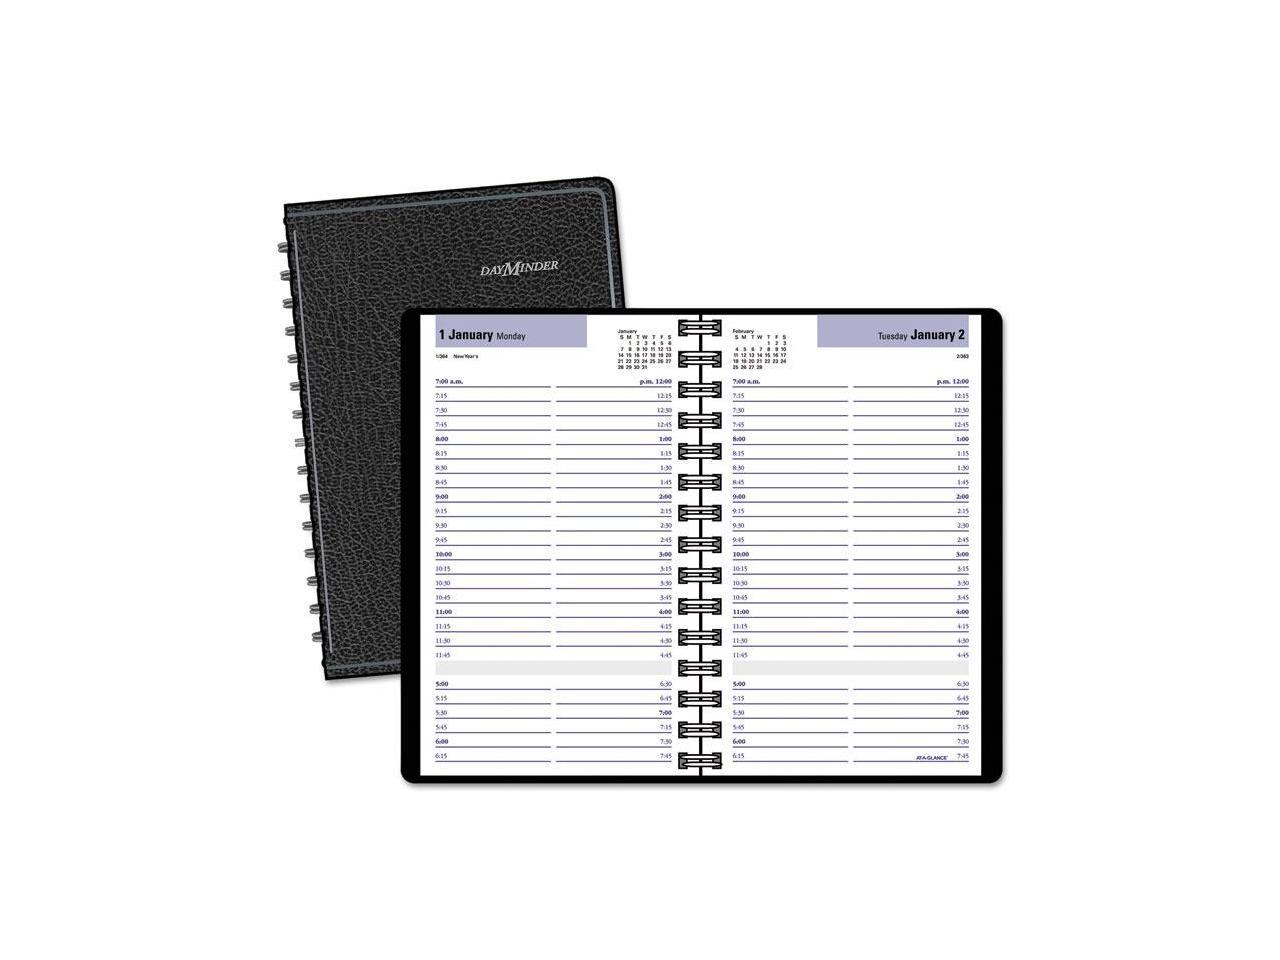 AT-A-GLANCE G100-00 Daily Appointment Book With15-Minute Appointments ...